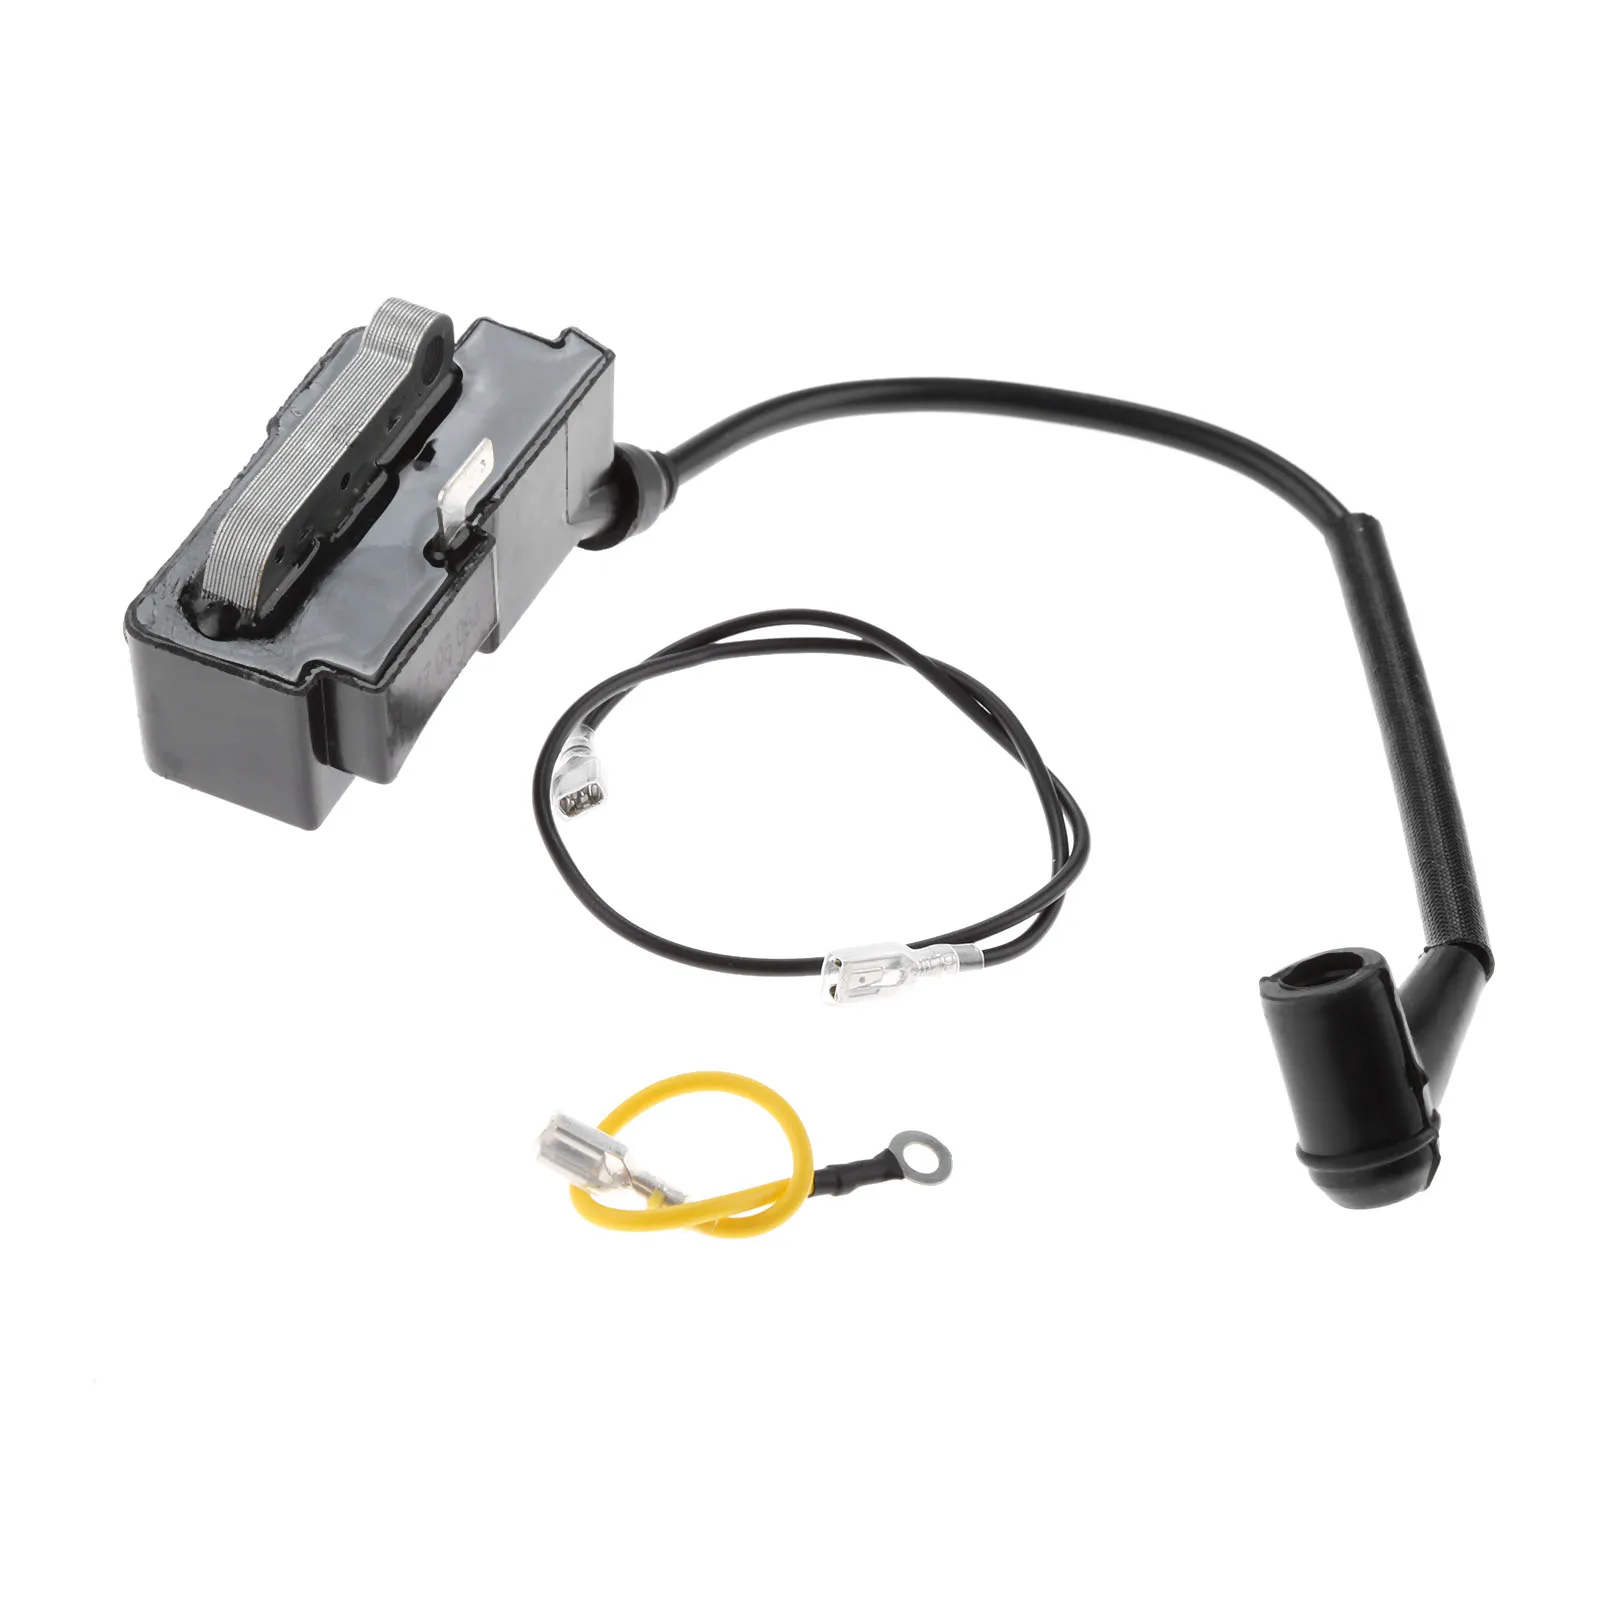 

dophee Ignition Coil Module Magneto Fit HUSQVARNAA 390 385 375 372 371 XP 365 362 359 357 353 351 350 346 345 340 Chainsaw